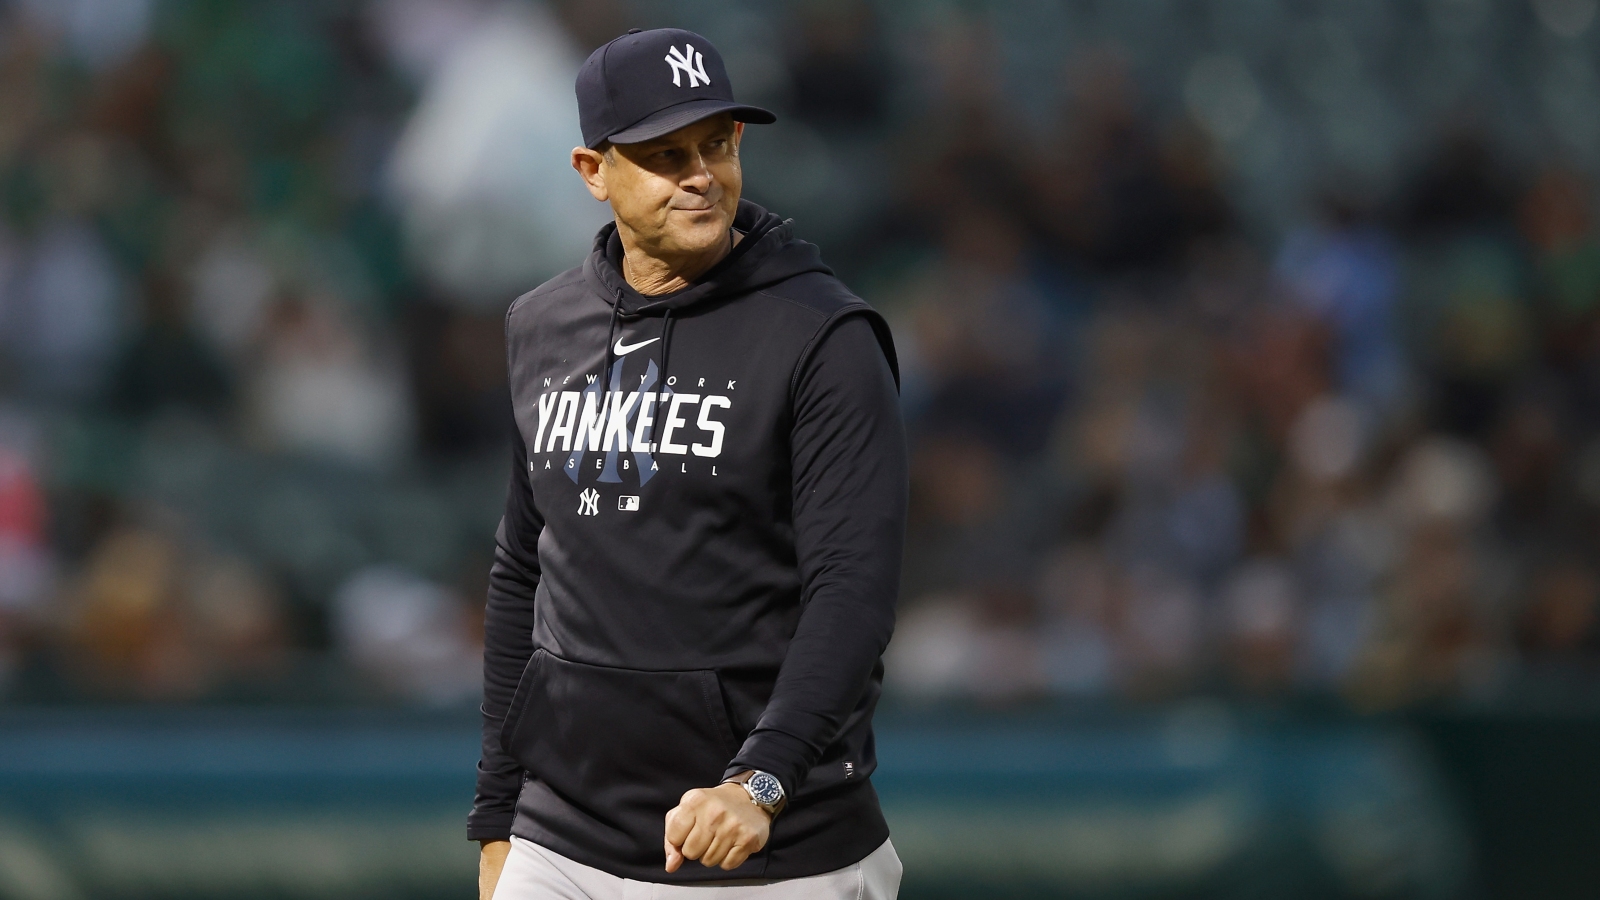 Yankees Fans Call For Aaron Boone's Job After Shohei Ohtani HR